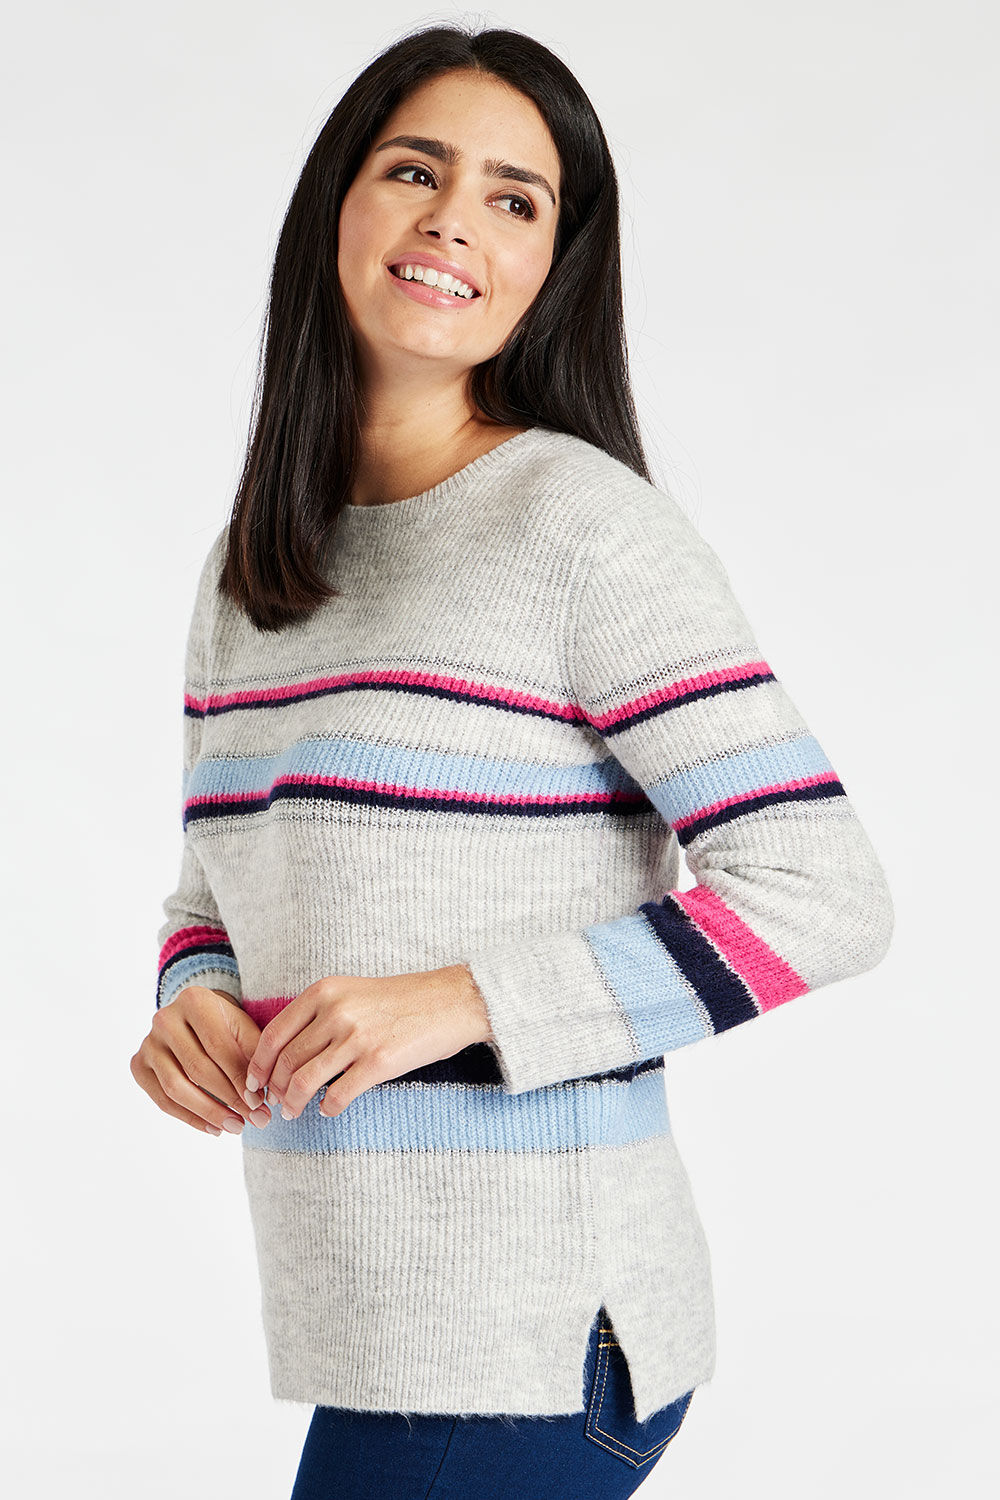 Bonmarche Women’s Grey, Pink and Blue Acrylic Striped Jumper, Size: 10